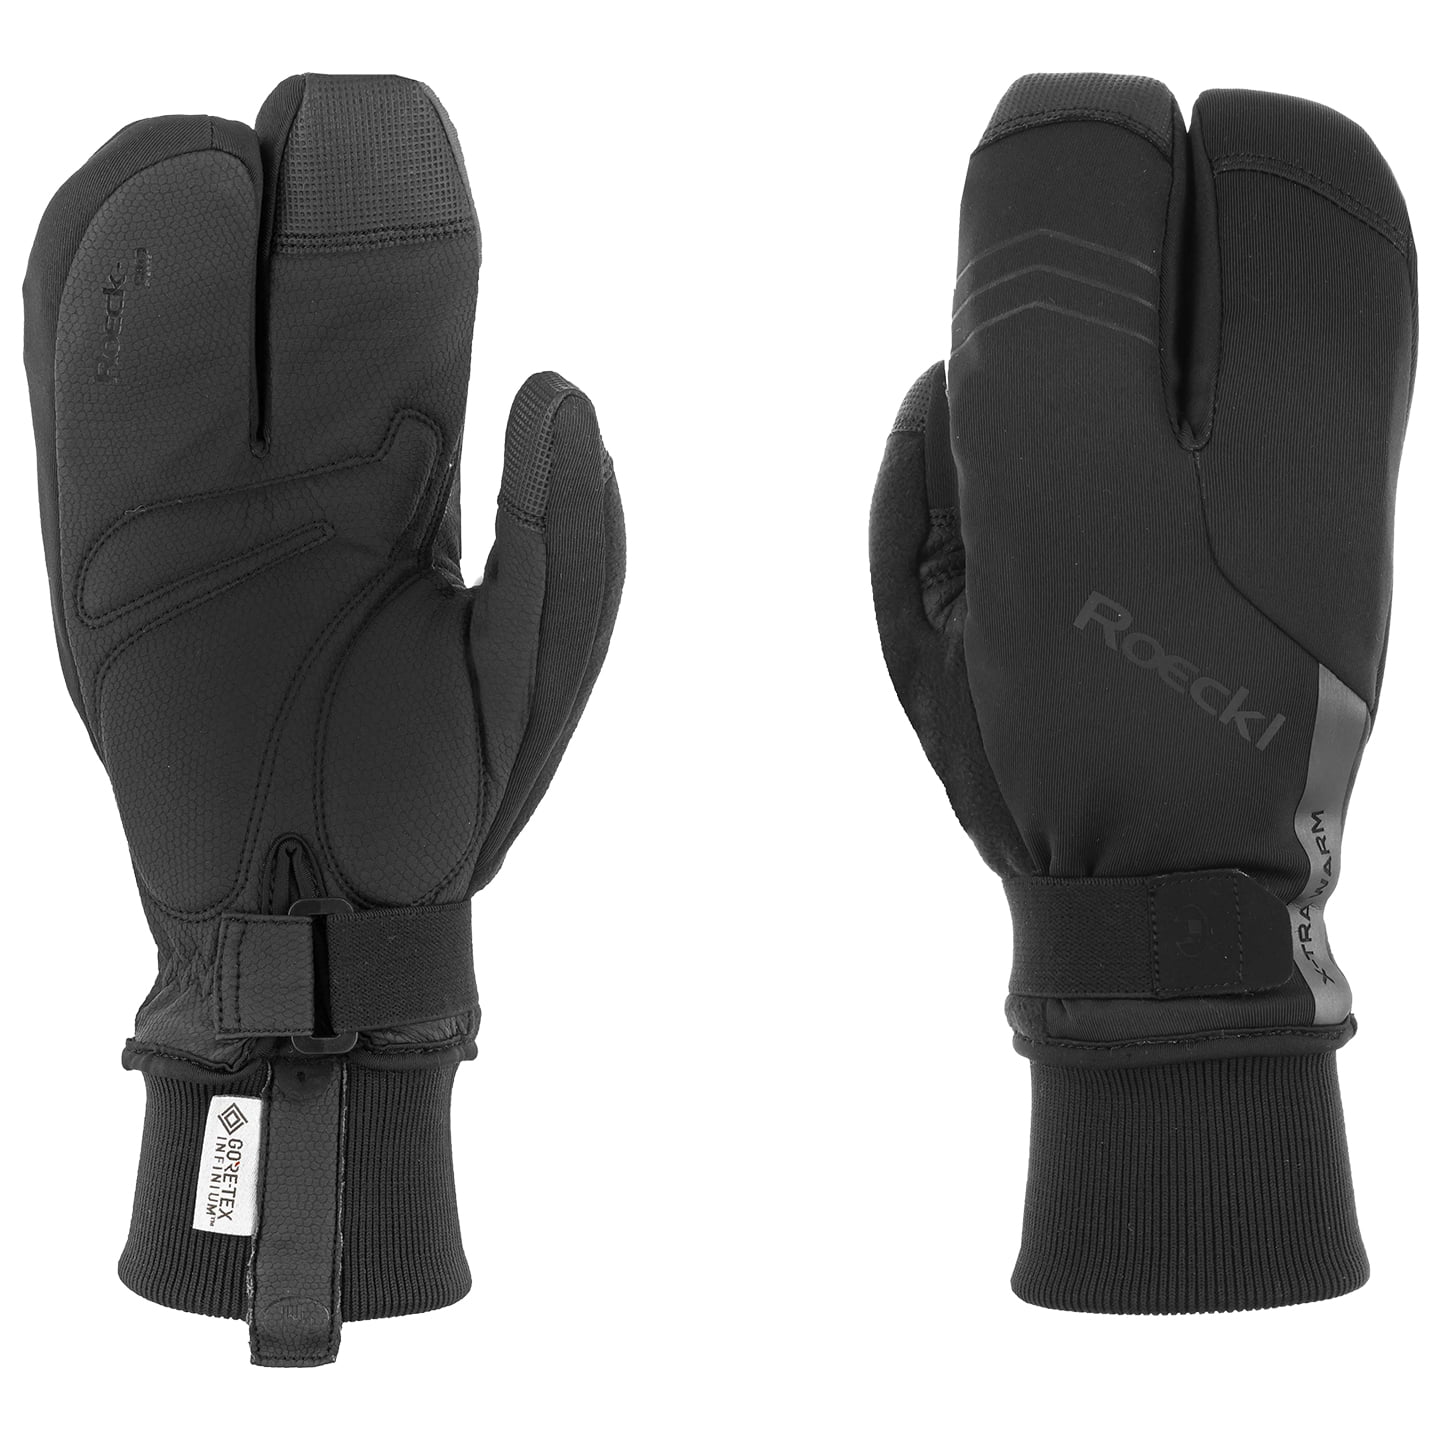 ROECKL Villach 2 Lobster Winter Gloves Winter Cycling Gloves, for men, size 9,5, Bike gloves, Cycling wear